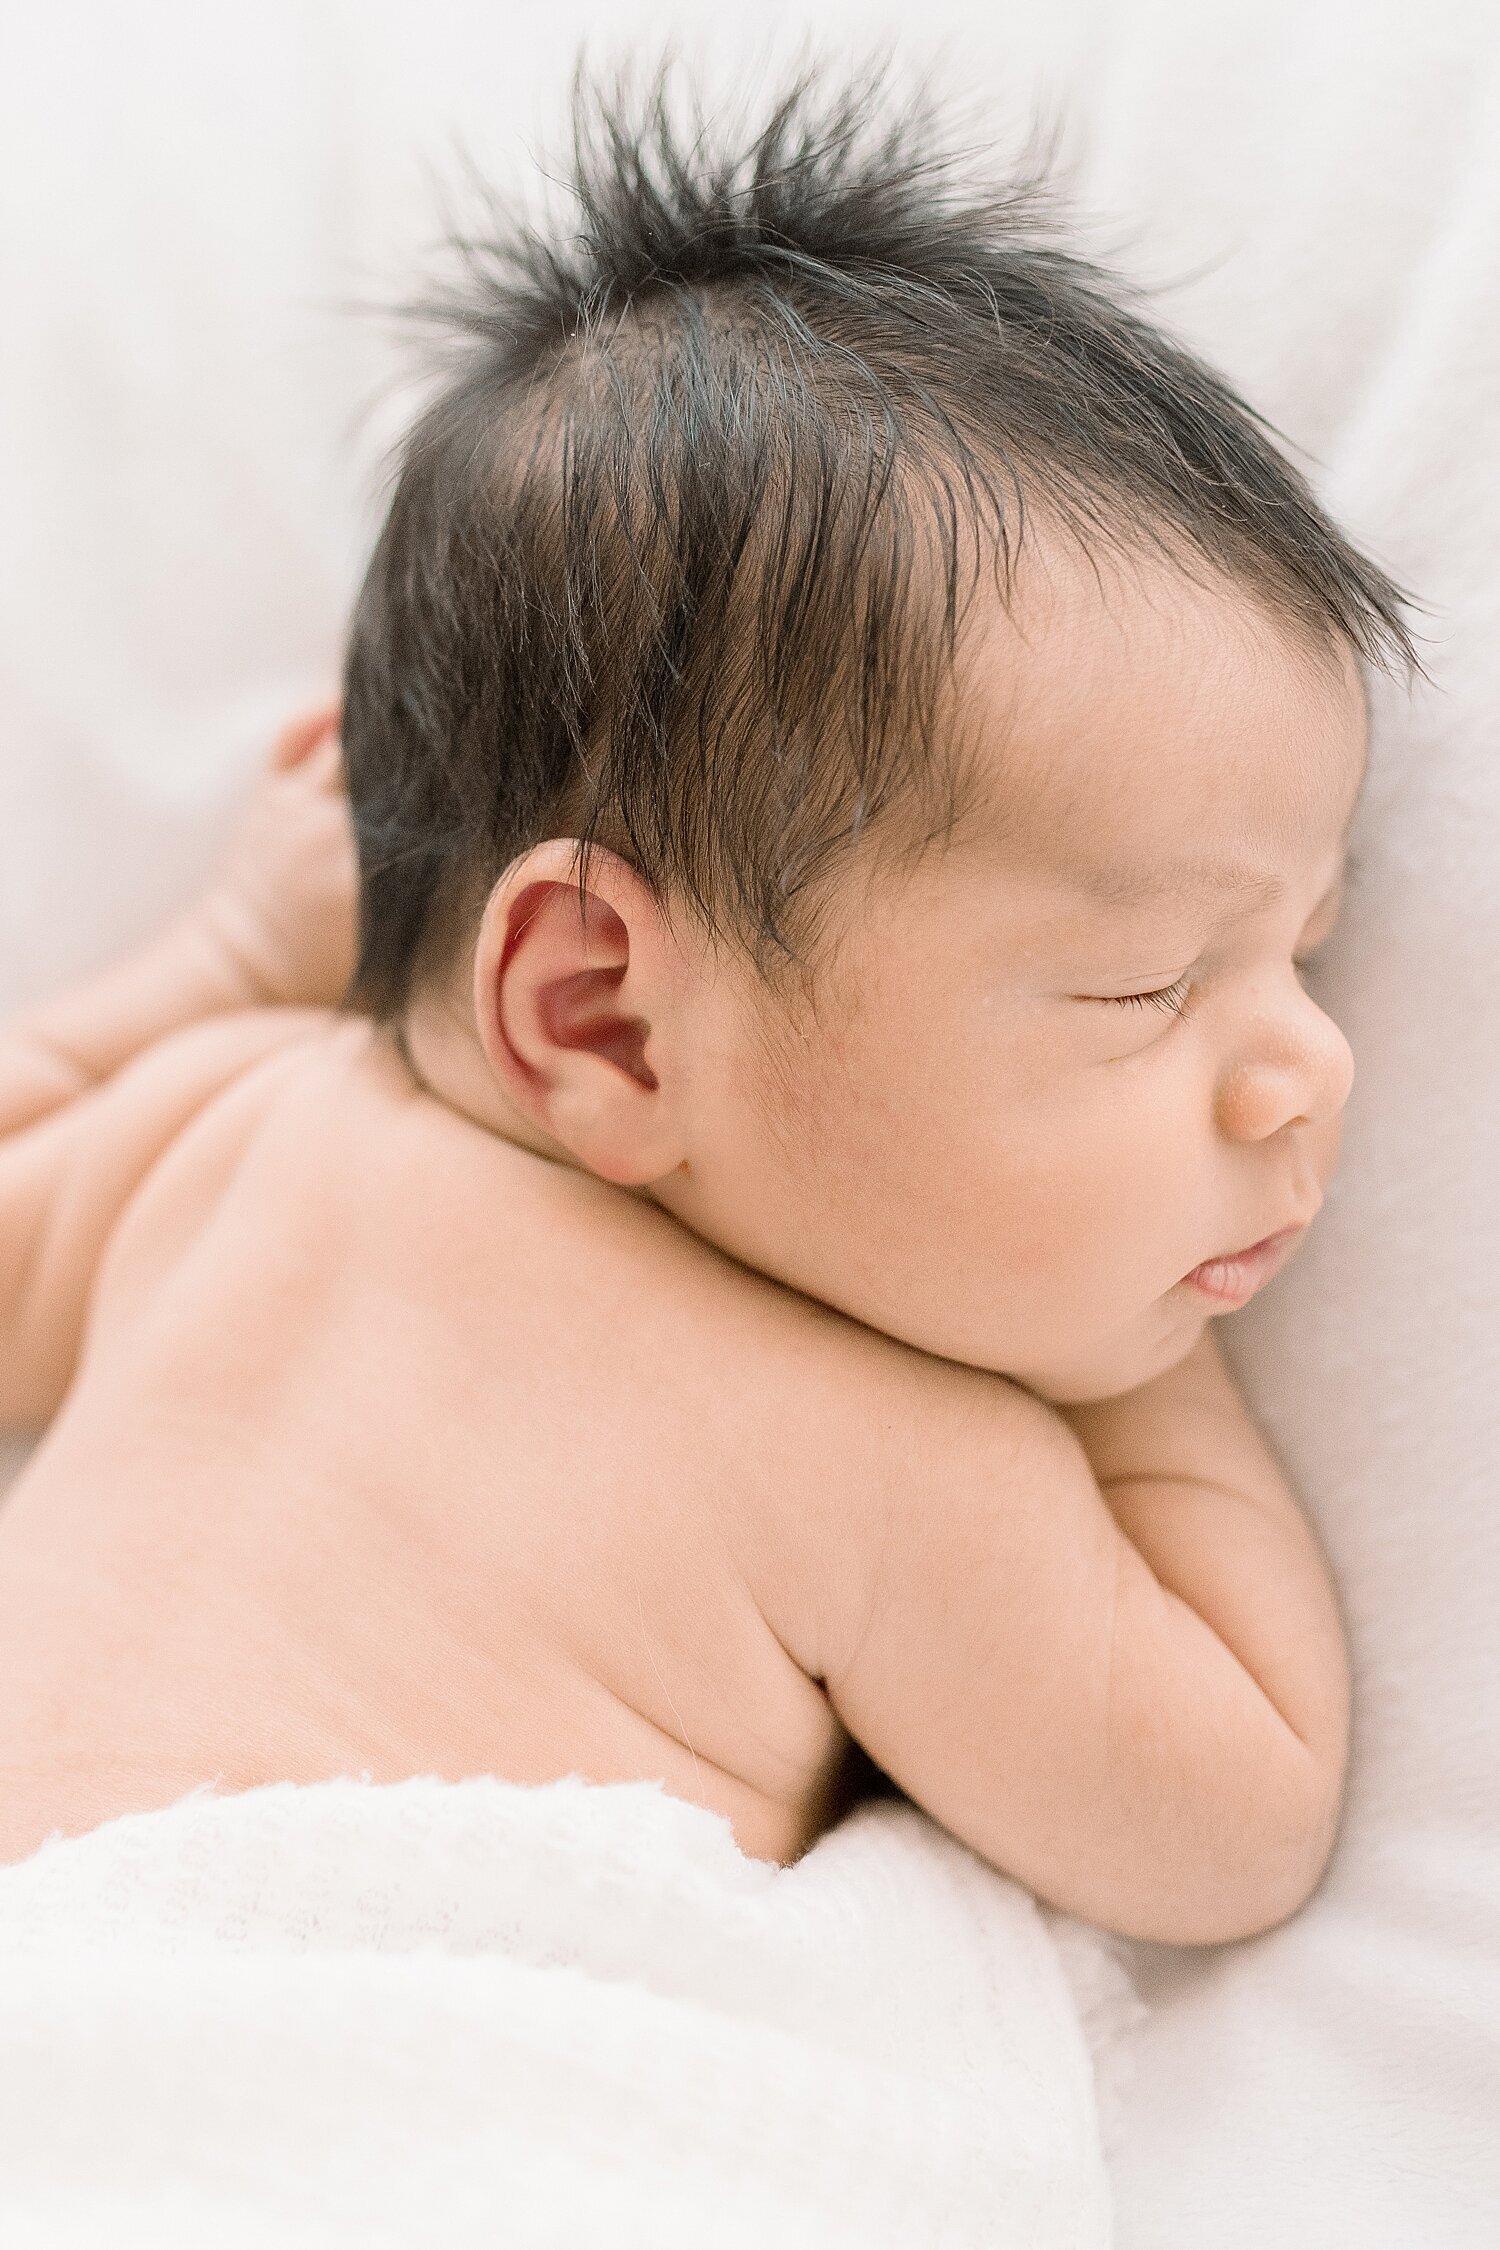 Newborn photo of baby boy with dark brown hair. He's swaddled on a white blanket. Photo by Newport Beach Newborn Photographer, Ambre Williams Photography.